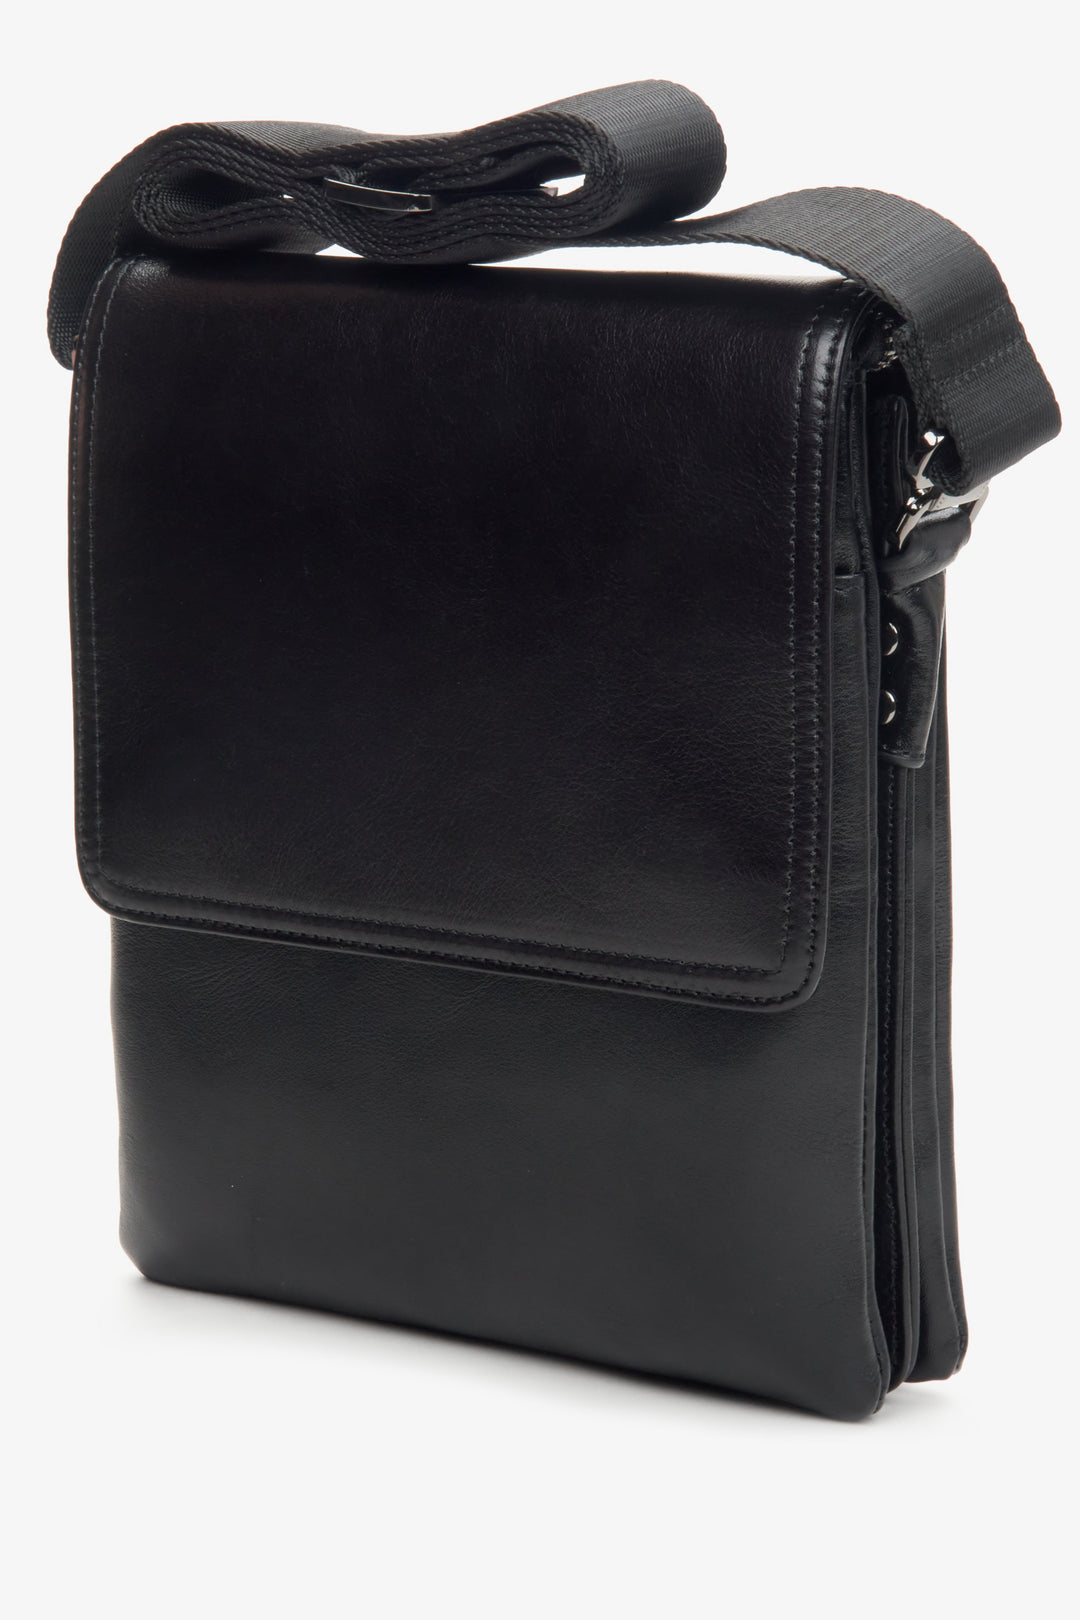 Men's small bag made of genuine leather by Estro.